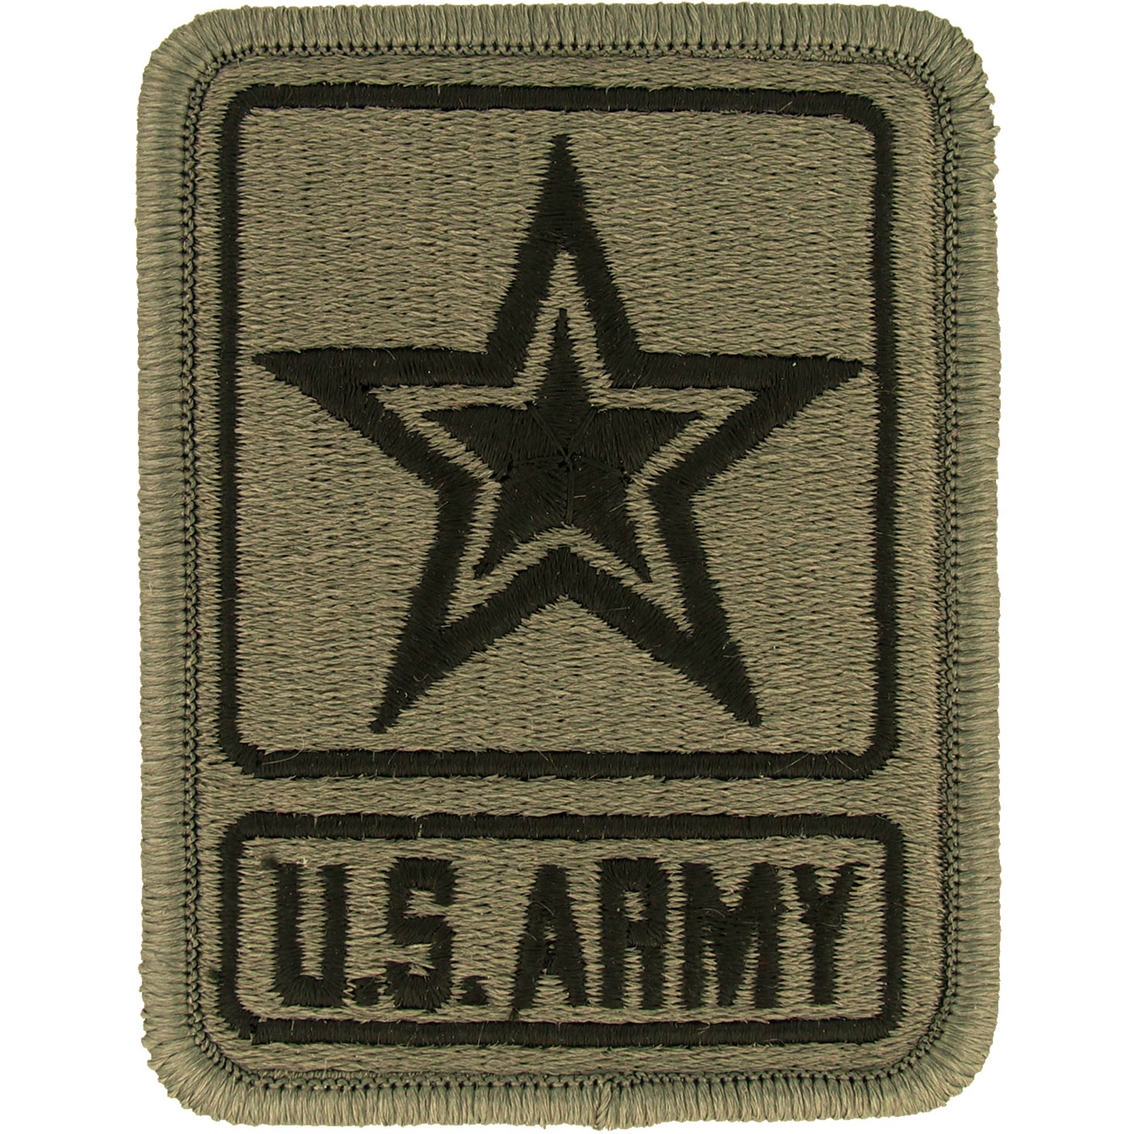 Army Ocp Patches